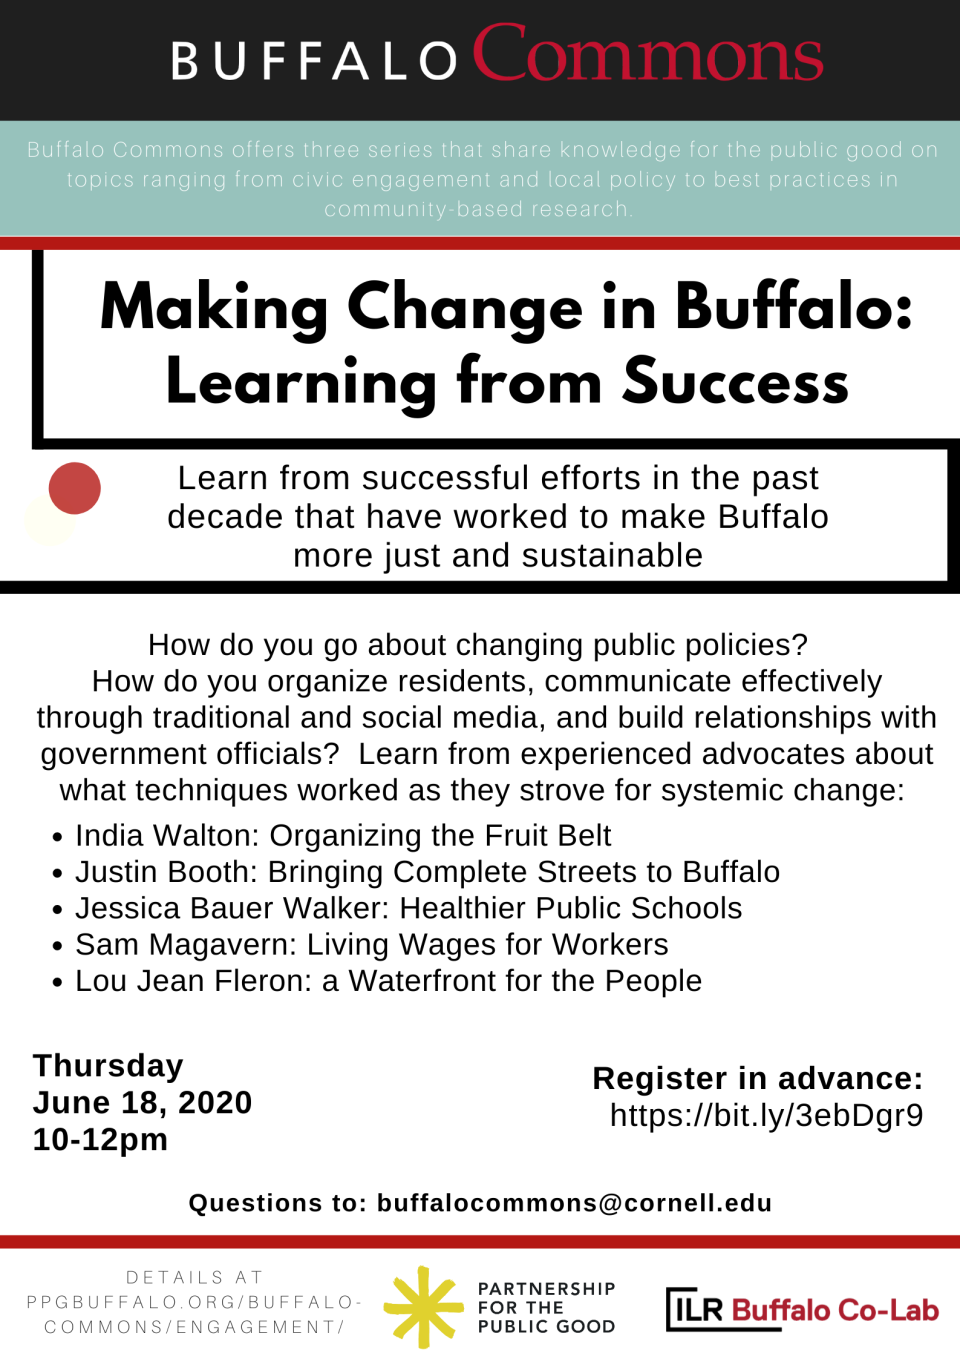 Buffalo Commons Workshop: Making Change in Buffalo: Learning from Success